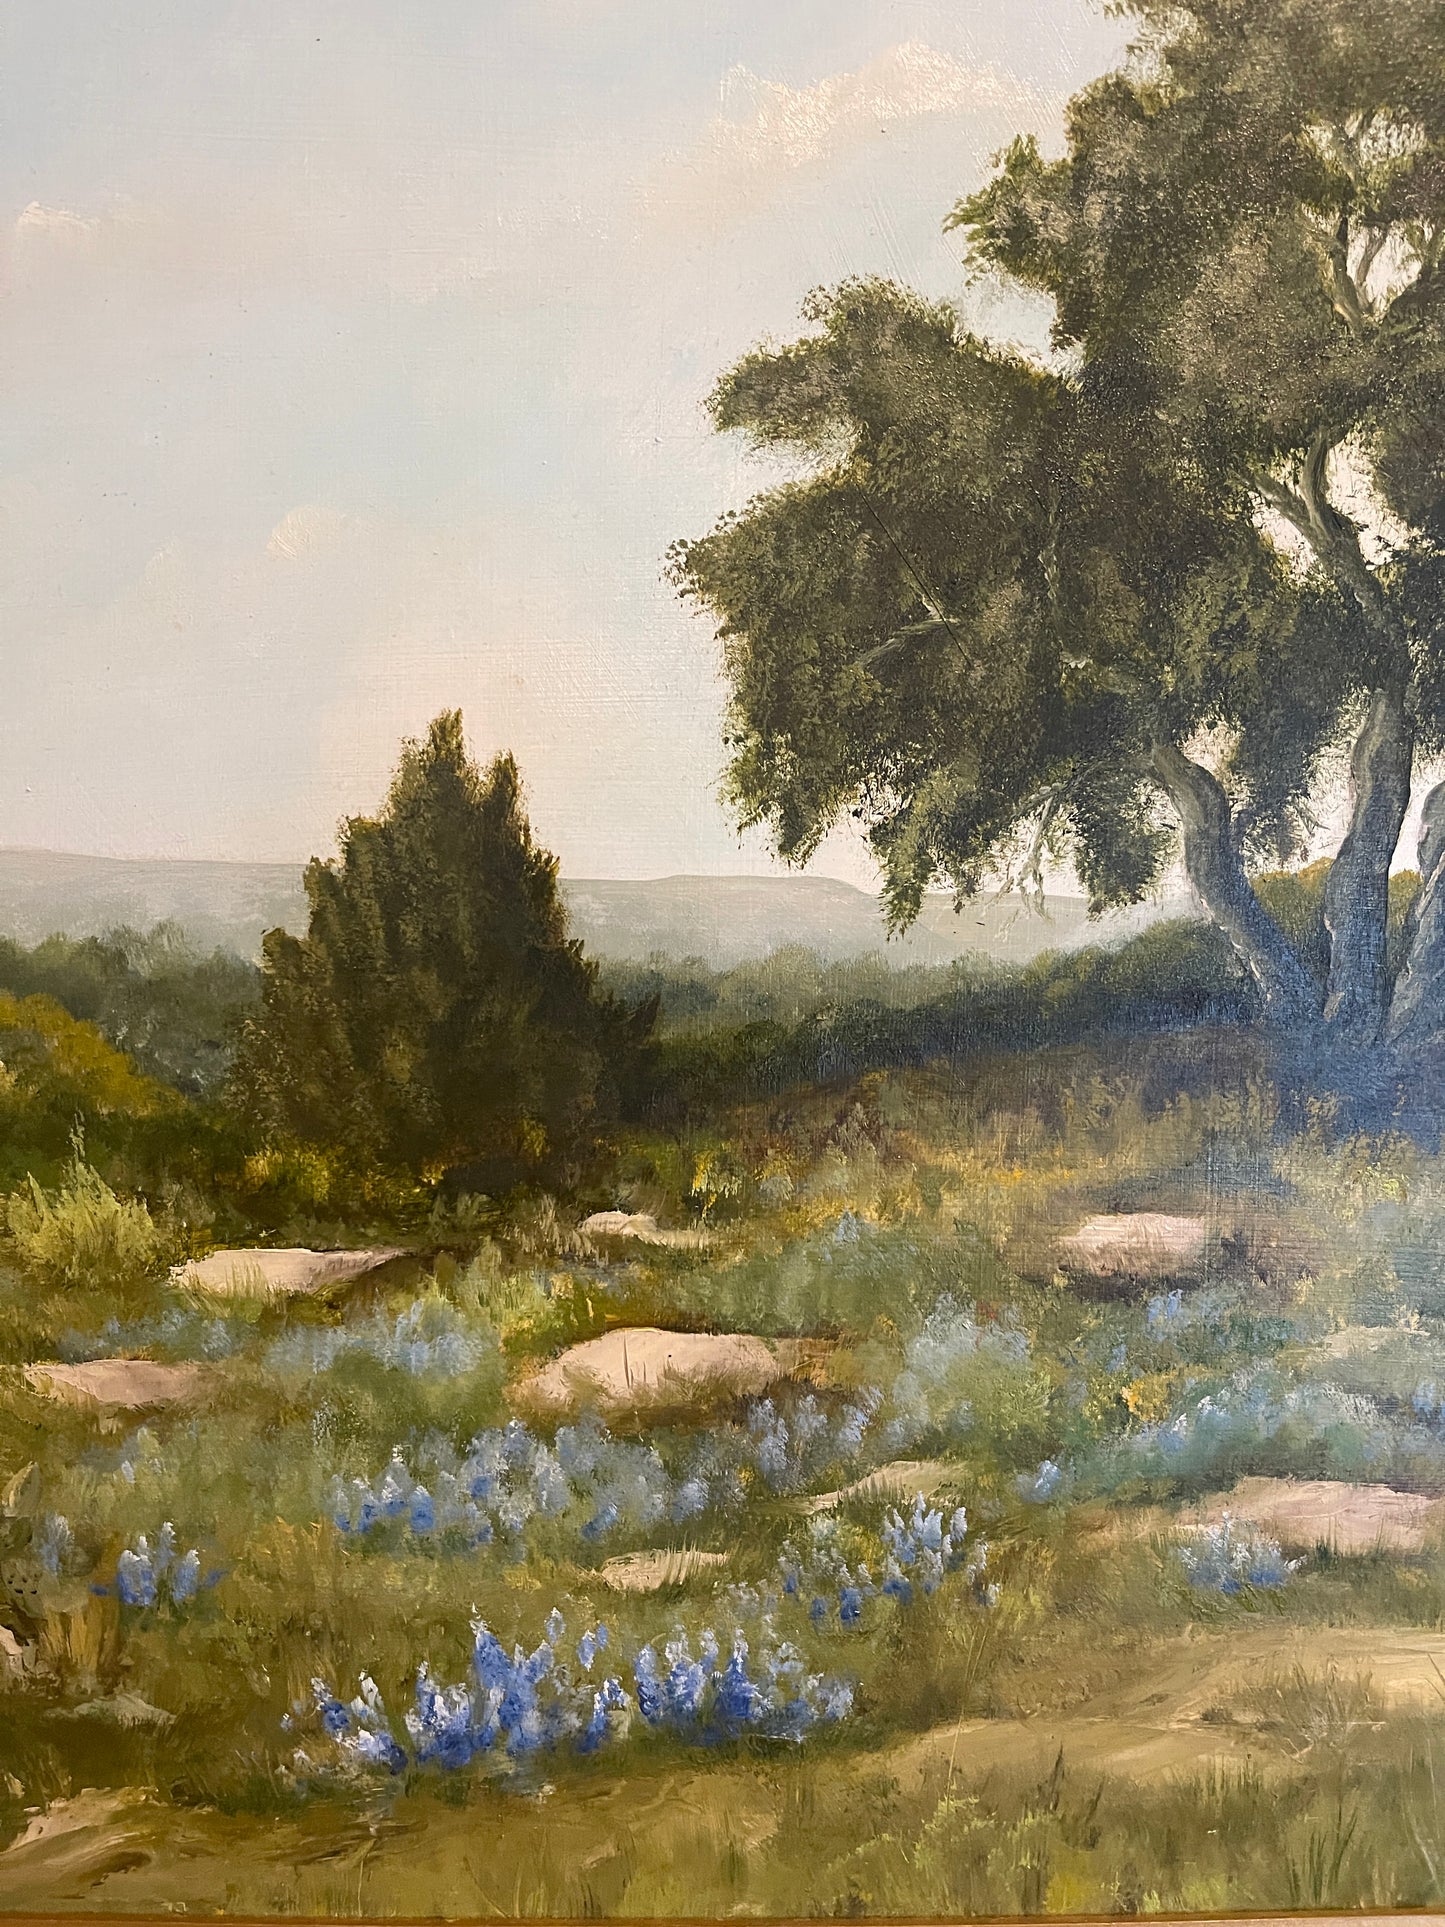 Texas Bluebonnet Painting, Framed French Blue and Gold, Texas Hill Country Painting by Anita Betke (1935-2006)